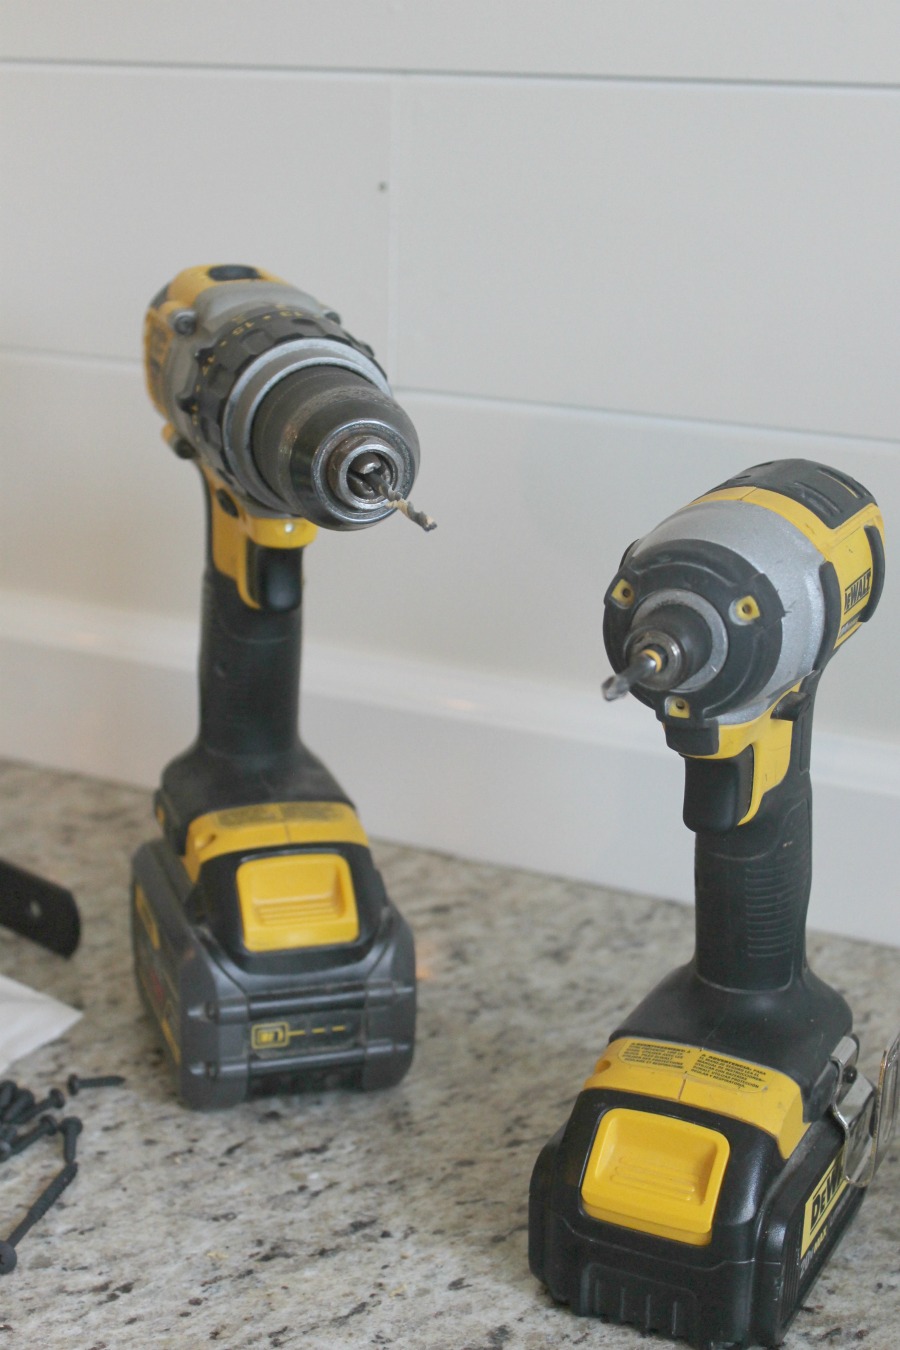 How to build DIY kitchen shelves - power drills